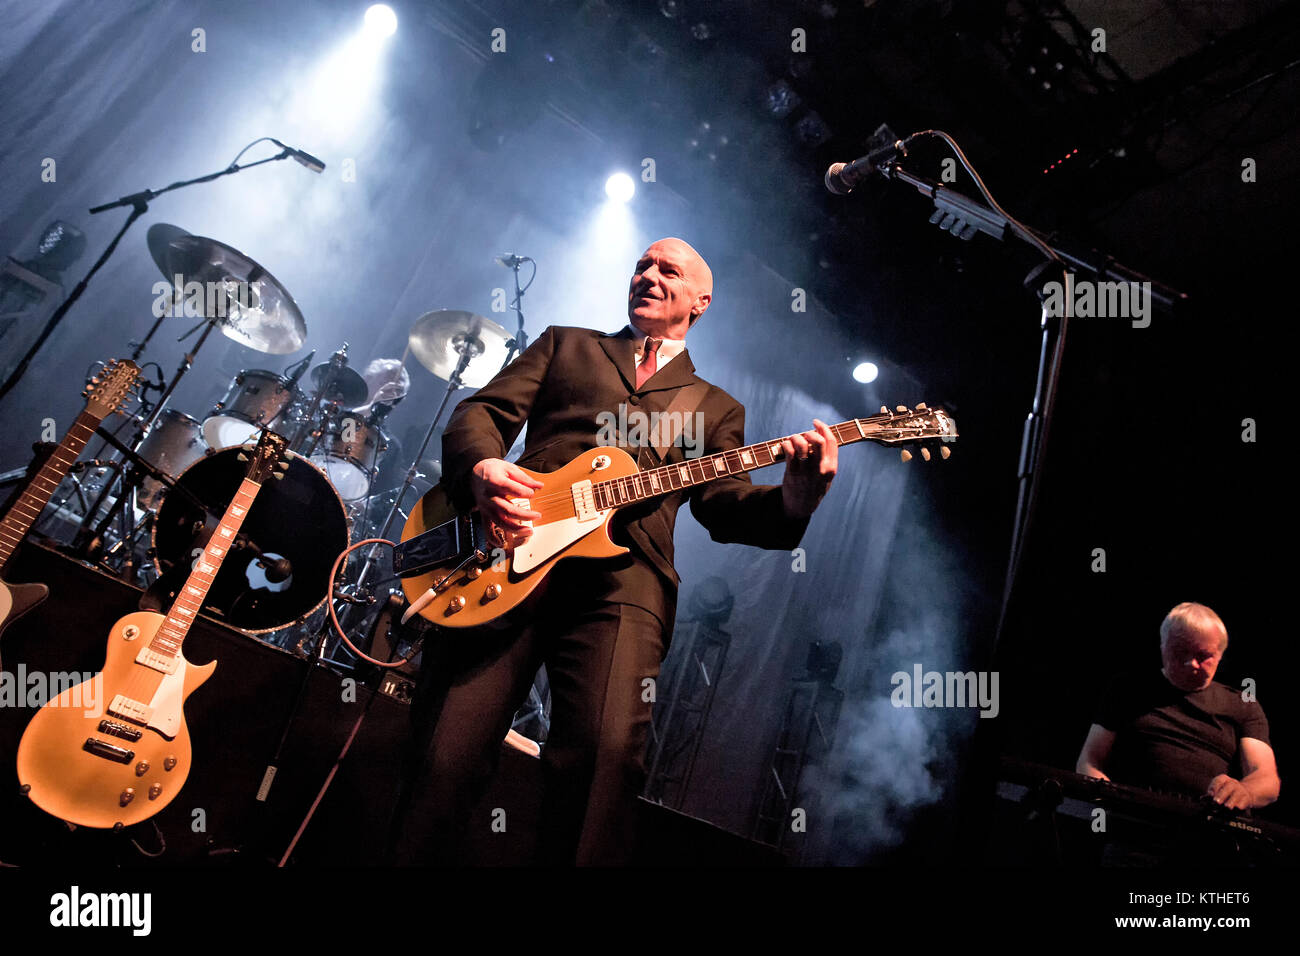 The British new wave band Ultravox performs a live concert at Rockefeller in Oslo. Here singer, songwriter and musician Midge Ure is seen live on stage. Denmark, 21/10 2012. Stock Photo